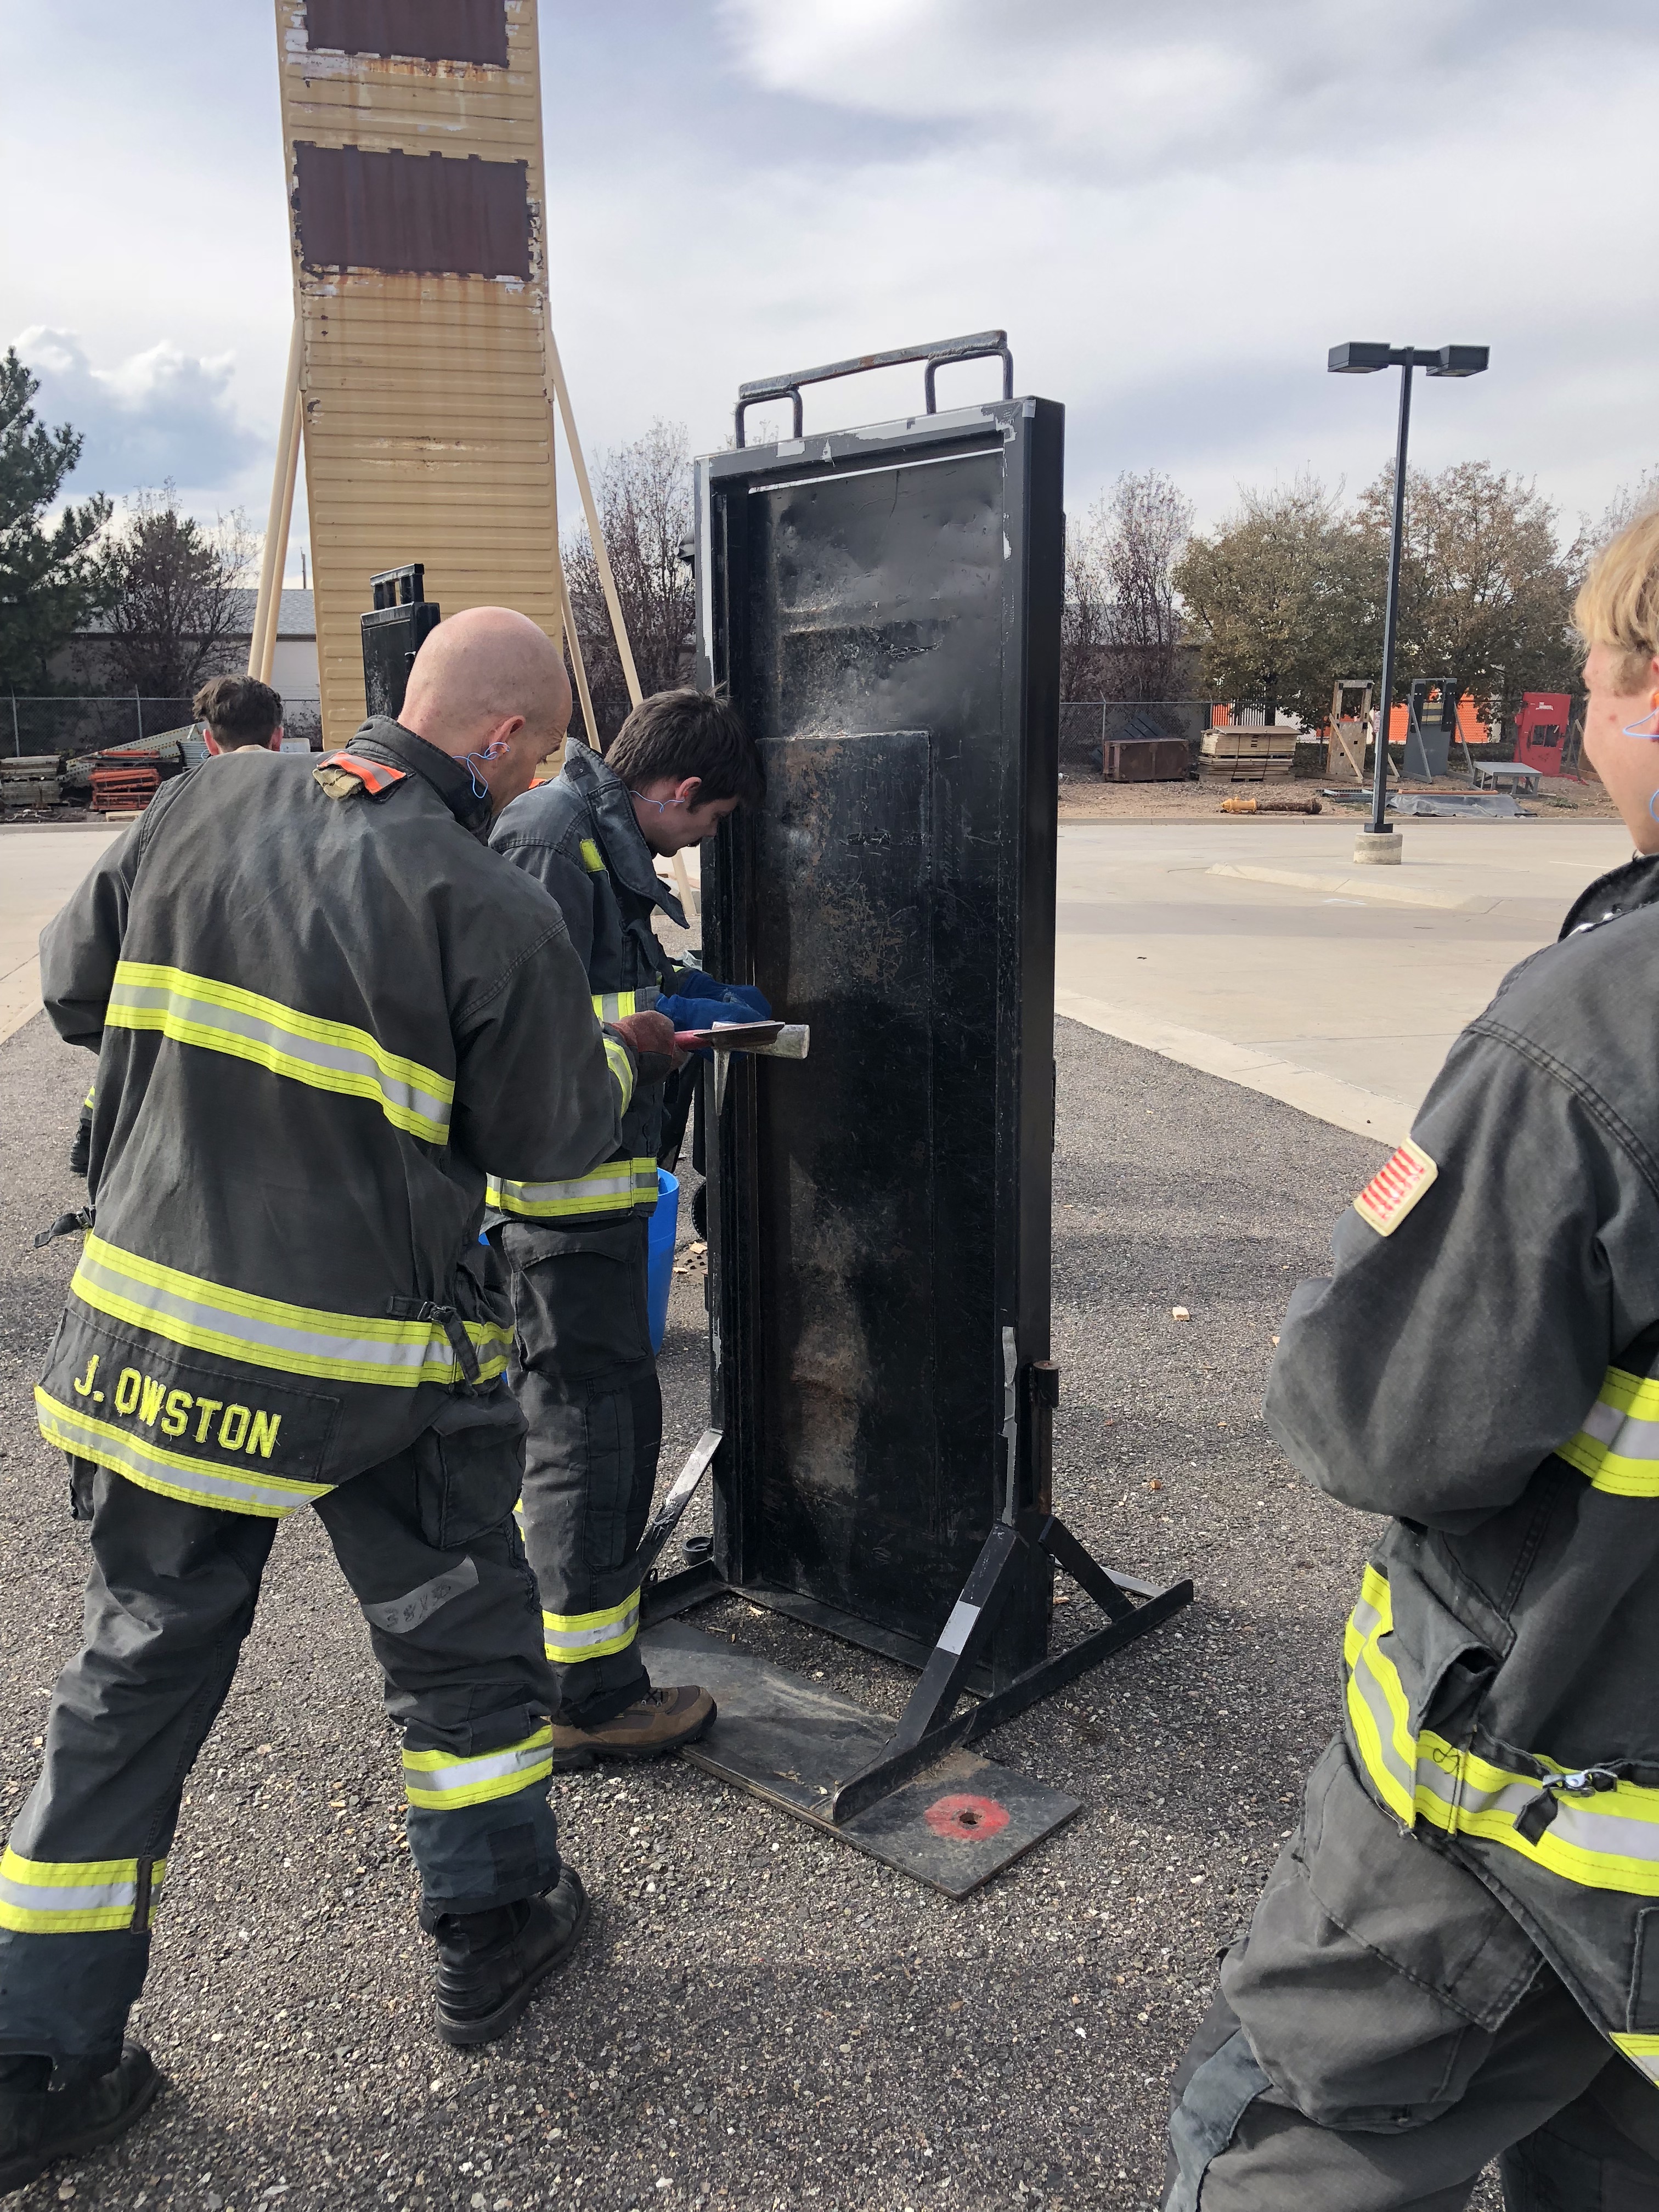 NIST firefighter trainees wait in line to try their hand at breaking down a door at the training facility